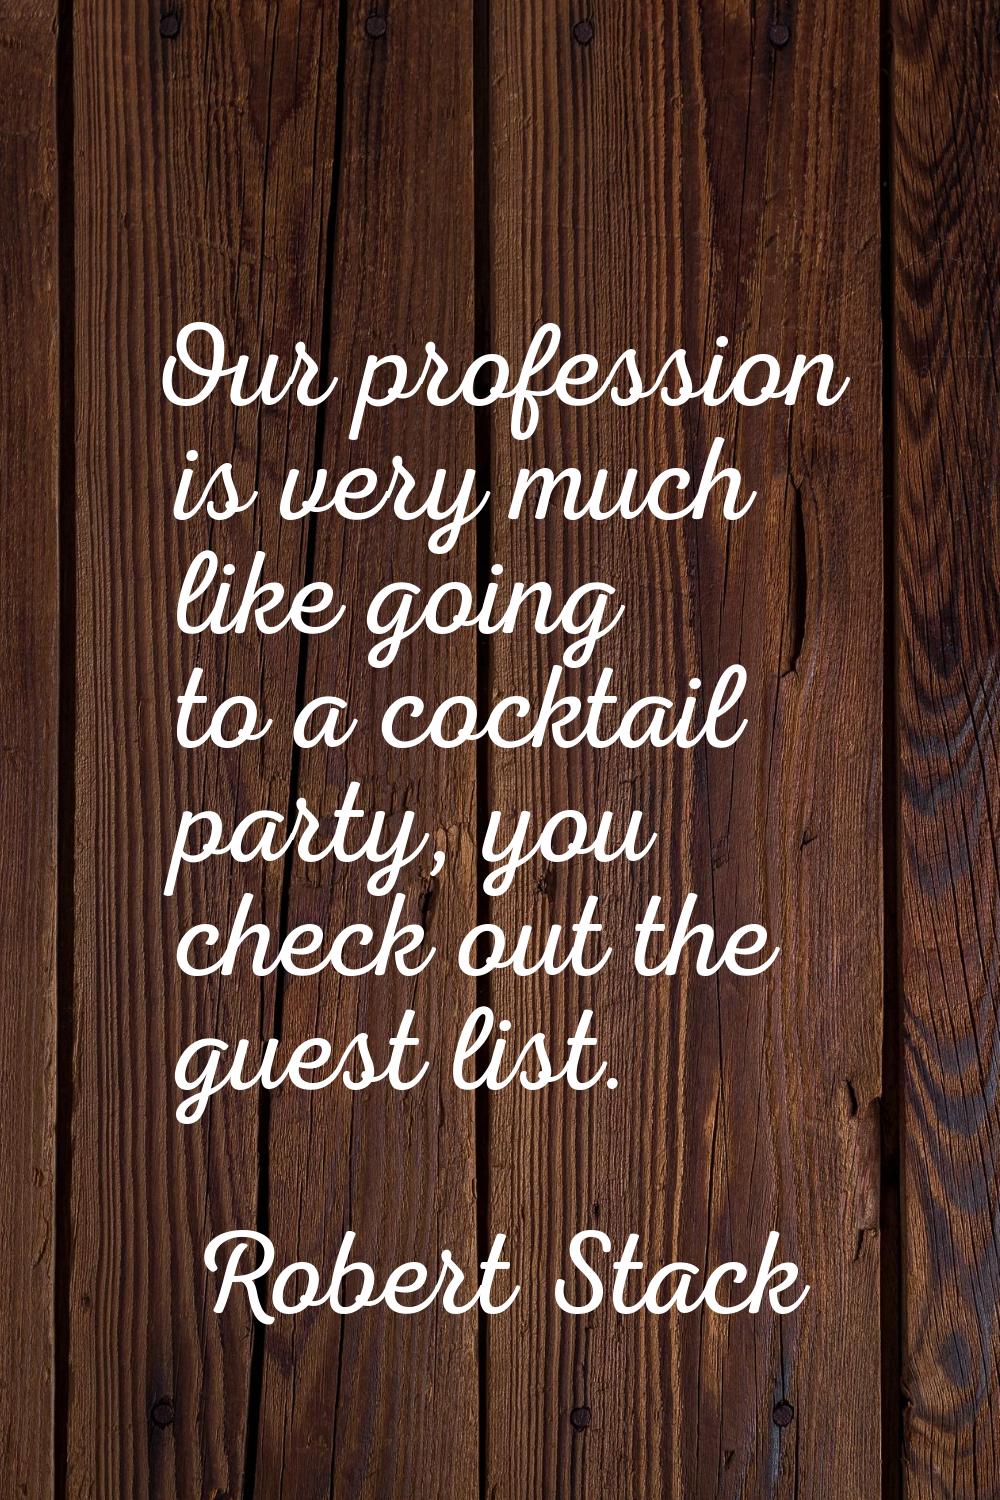 Our profession is very much like going to a cocktail party, you check out the guest list.